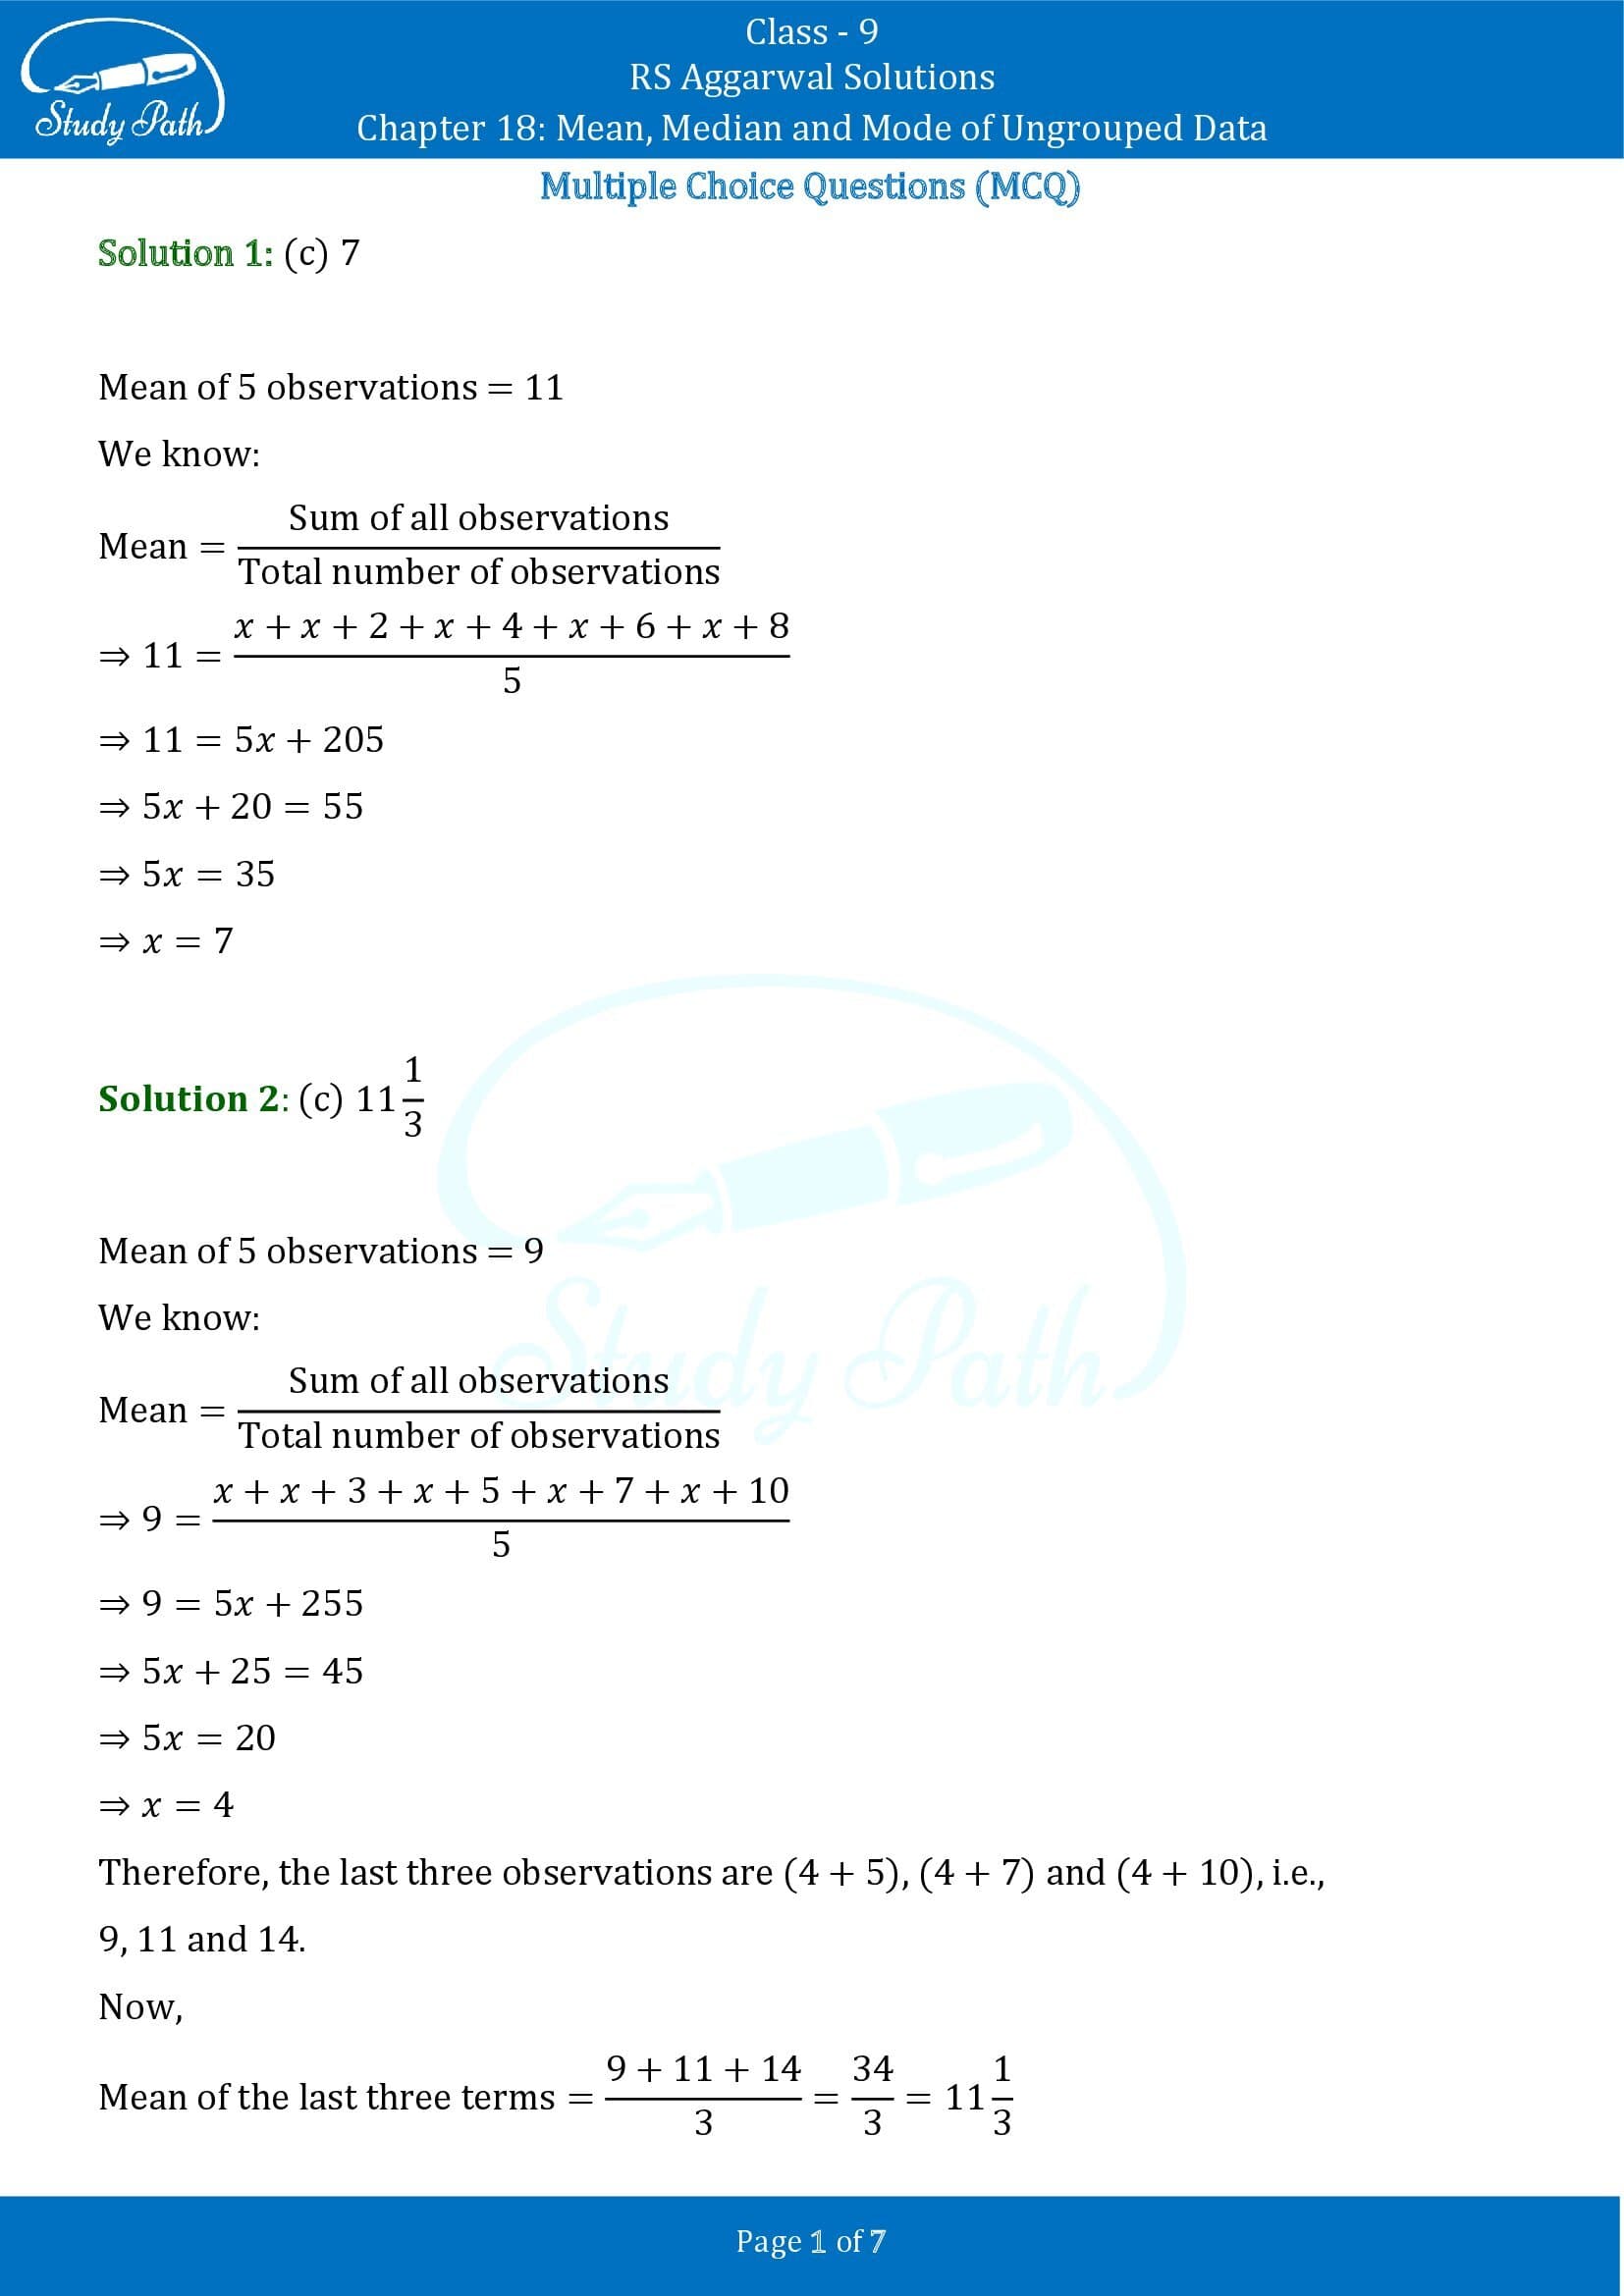 RS Aggarwal Solutions Class 9 Chapter 18 Mean Median and Mode of Ungrouped Data Multiple Choice Questions MCQs 00001